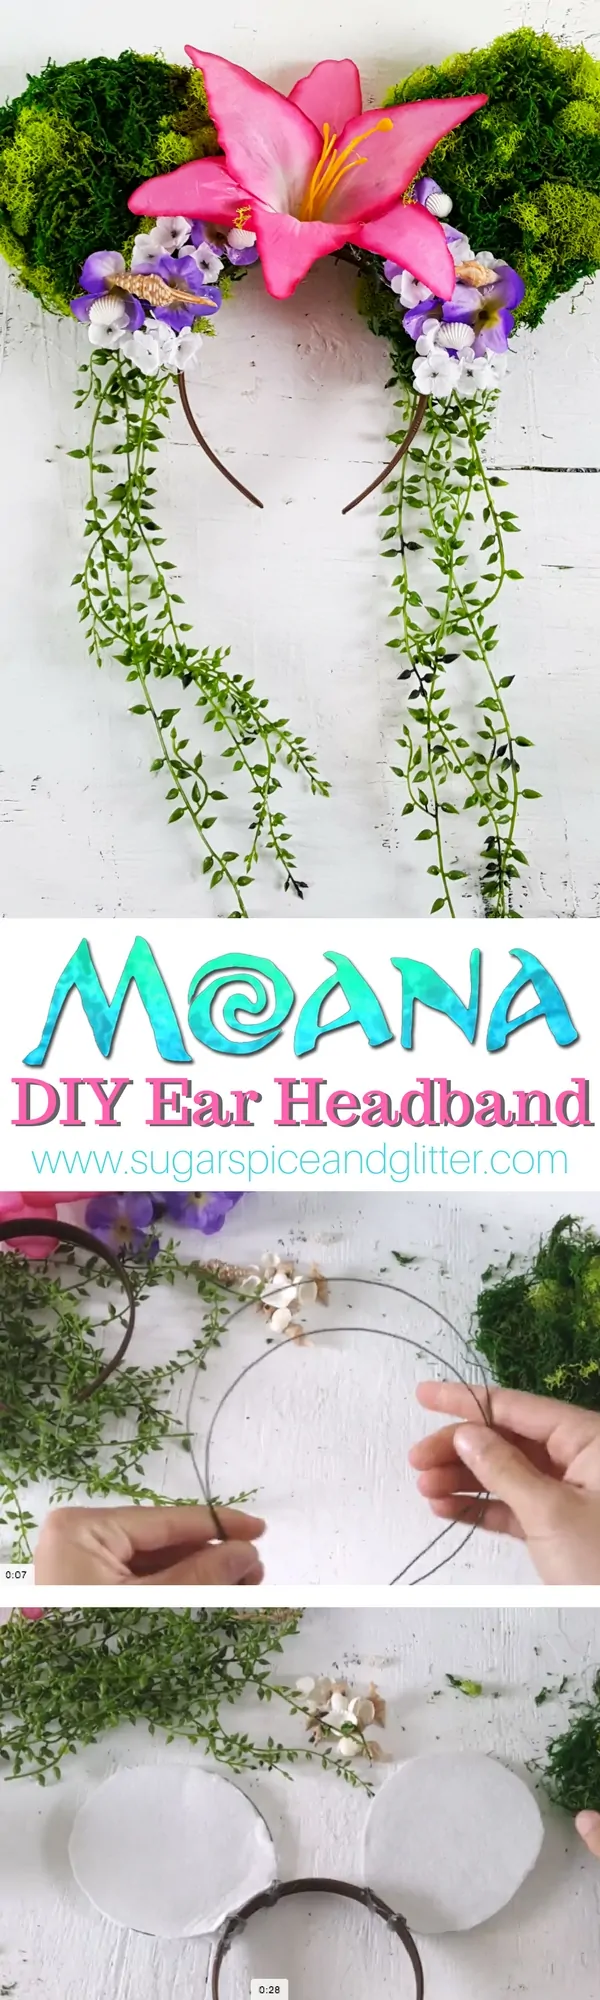 Moana Tefiti Mickey Mouse Ears perfect for a Moana party or DIY accessories for wearing to DisneyWorld